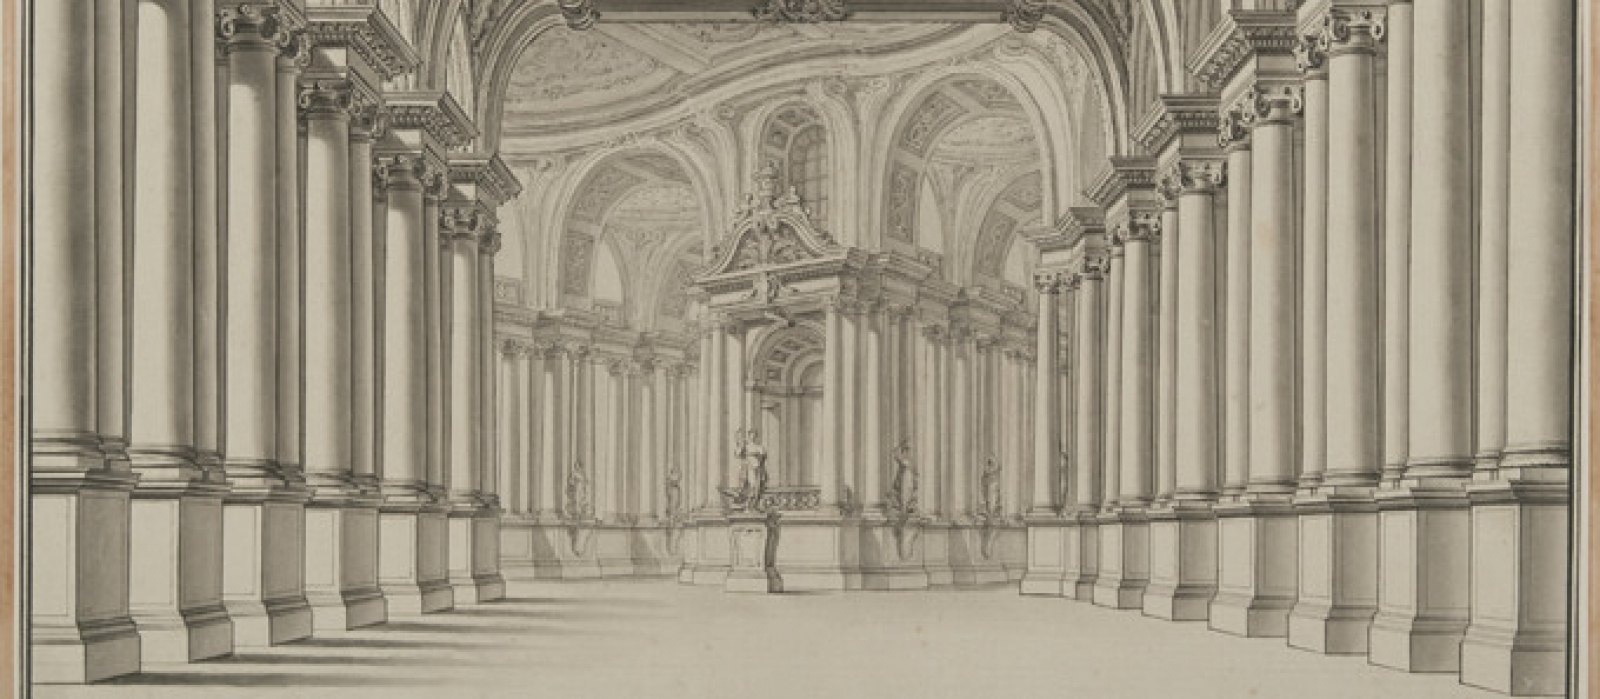 Imagined Architecture - Drawings from the Collections of the Fondazione Giorgio Cini